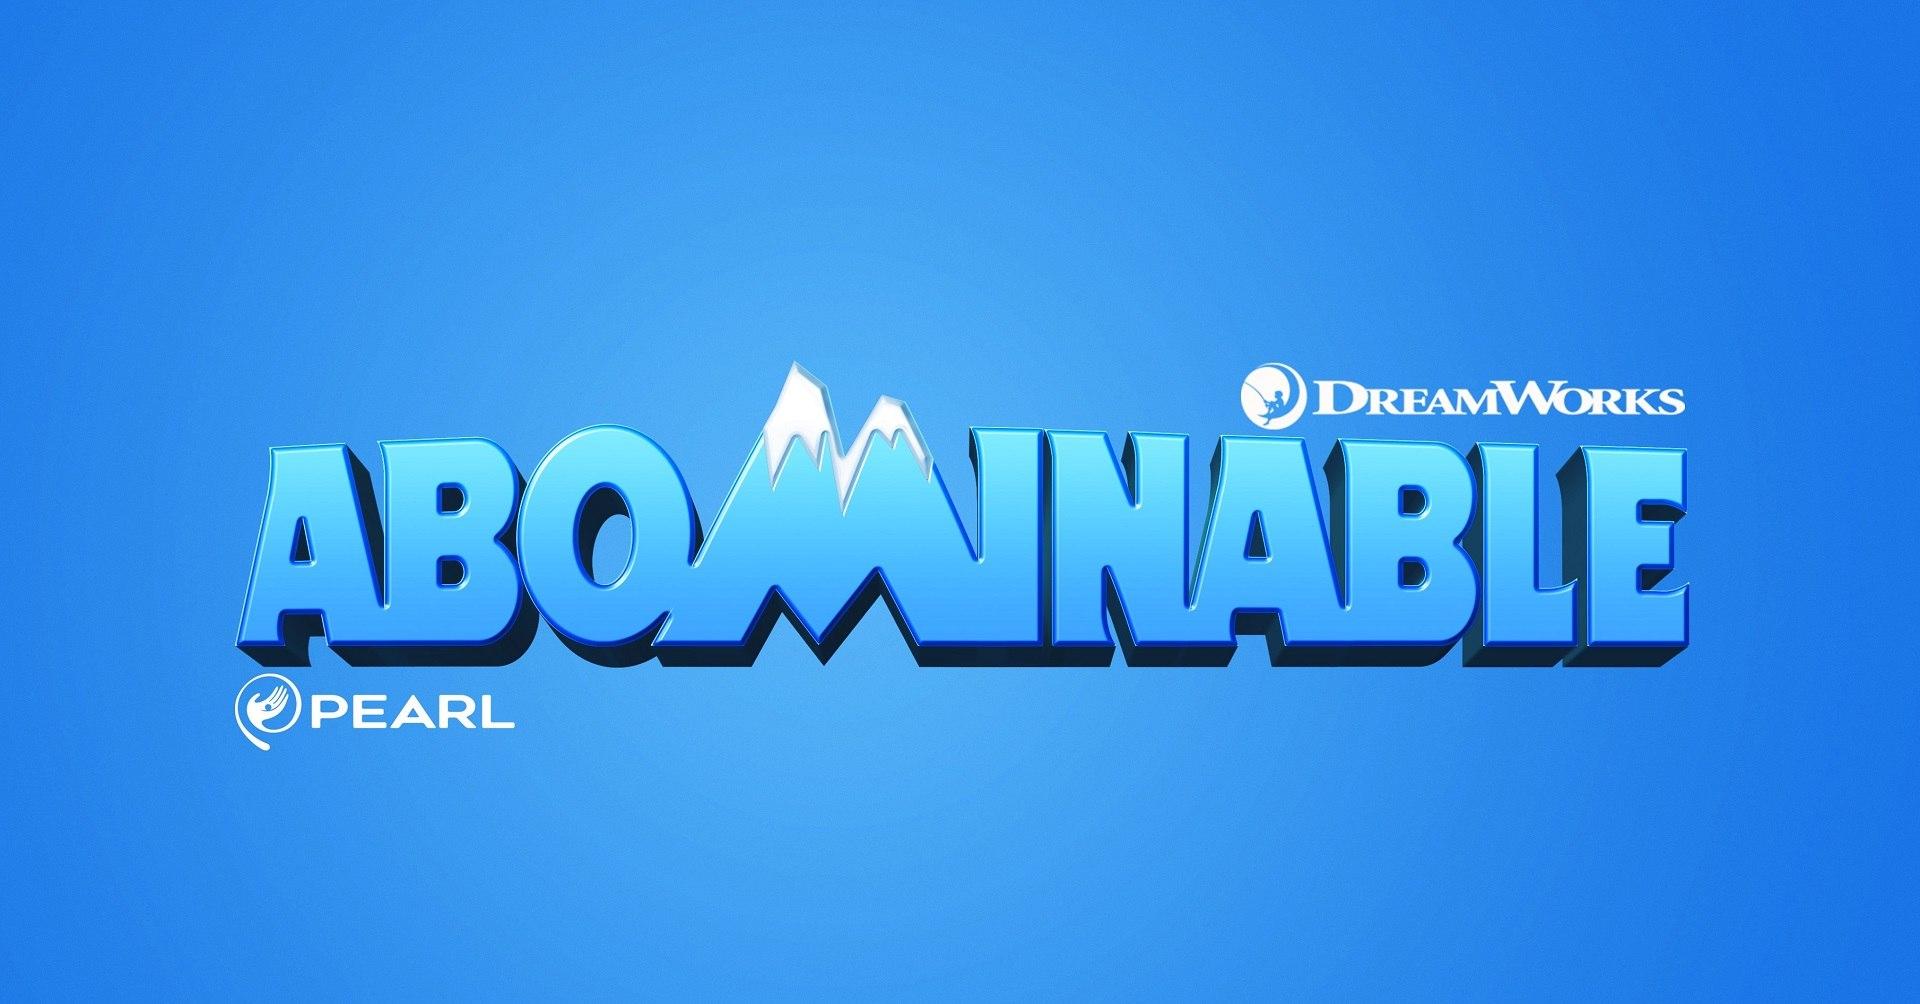 DreamWorks Animation to Present 'Abominable' Feature & More at